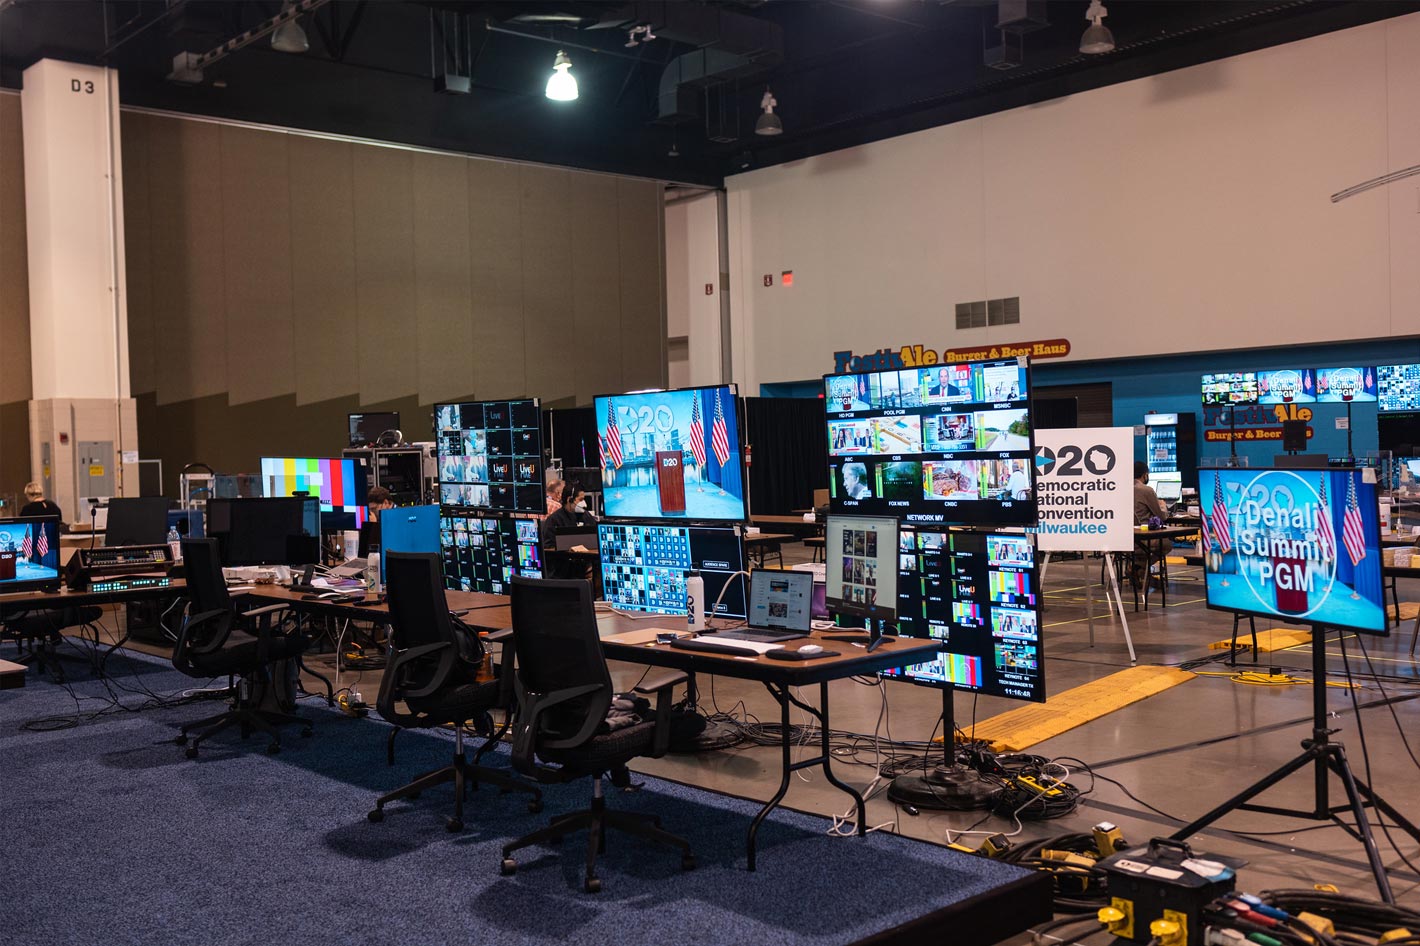 Behind the Scenes of the 2020 Democratic National Convention